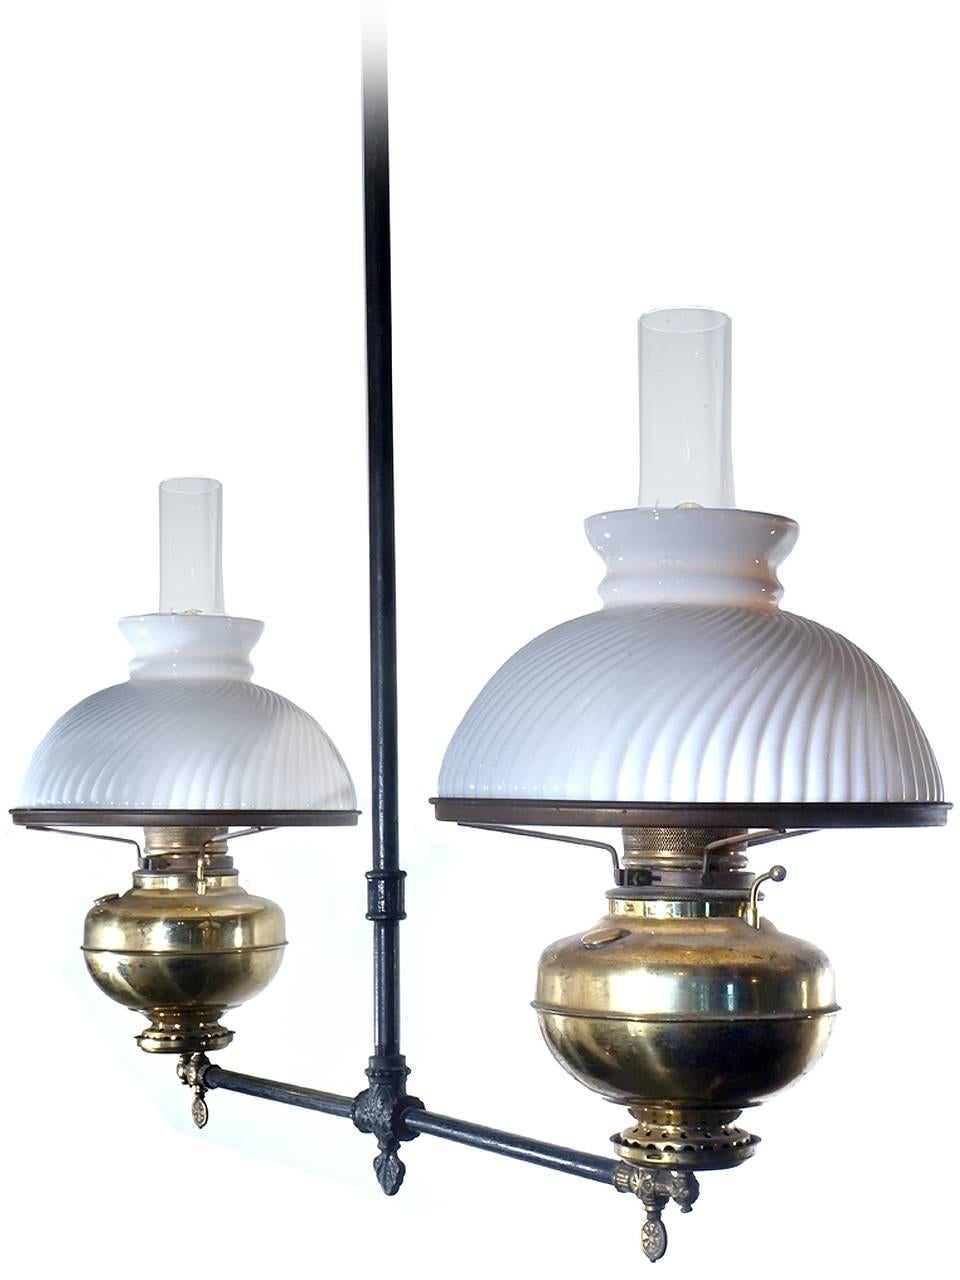 This lamp retains all the original details including the key valves, glass brass lanterns and fittings. When the fixtures were wired to take standard bulbs we wanted to keep the early character.